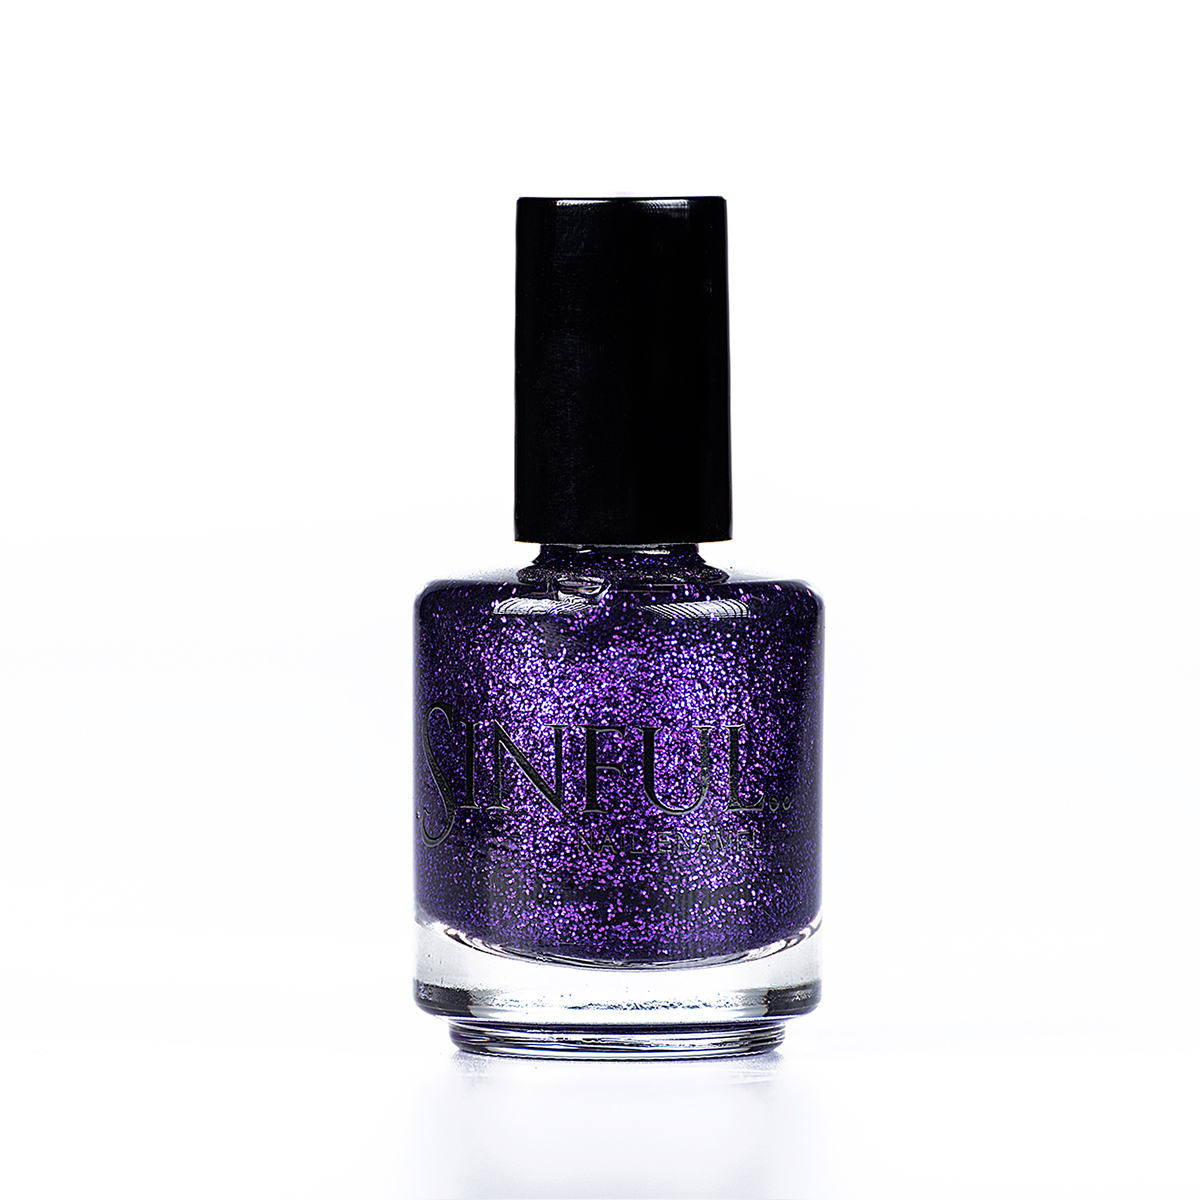 Vibrant purple glitter. Sinful polishes are long lasting and chip resistant, however we do recommend using a Top Coat to finish every polish. This adds a high shine finish and extends the polish wear-time. 15ml